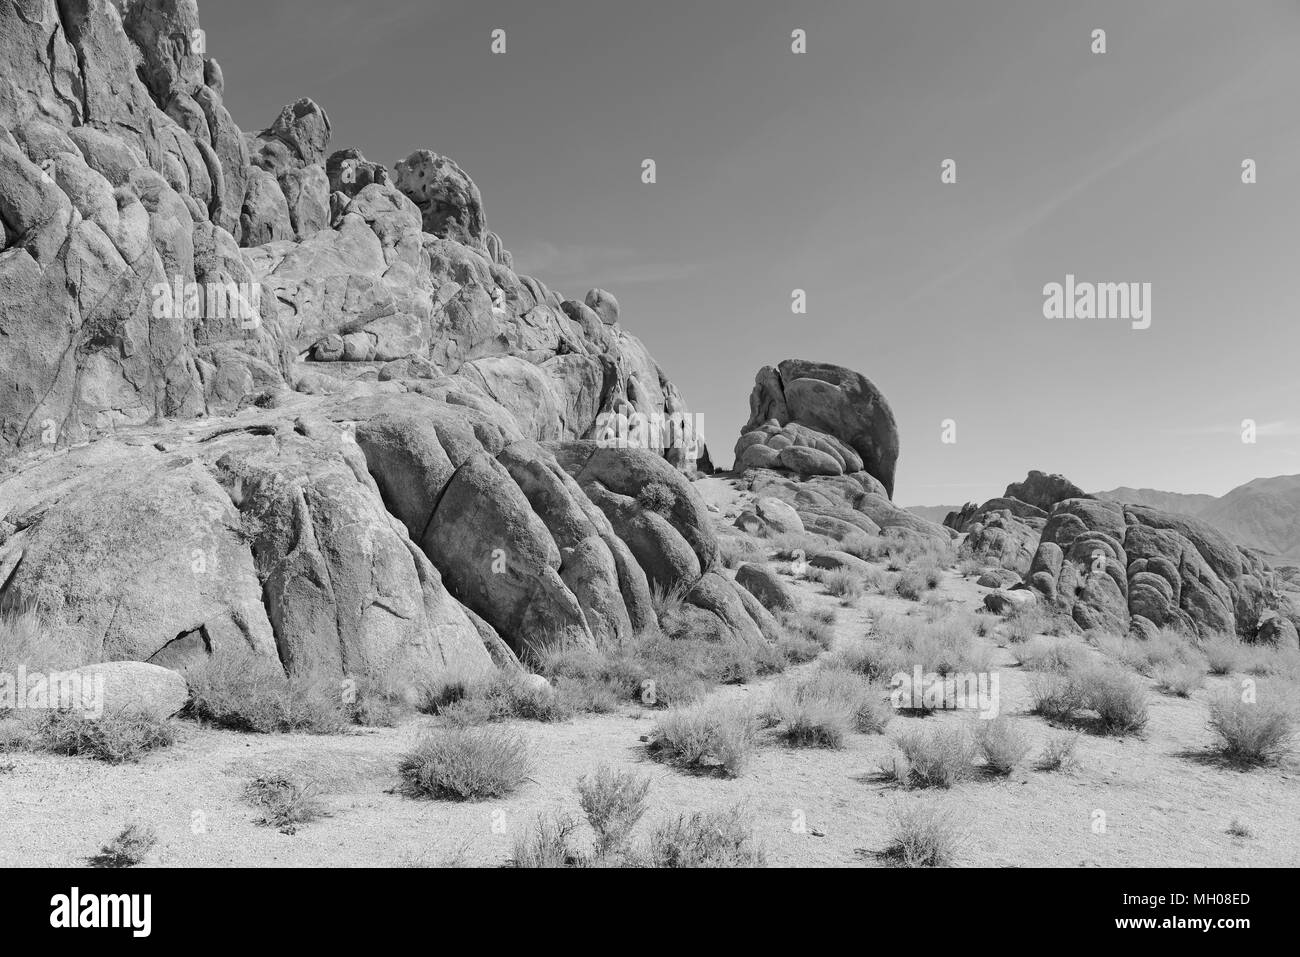 Alabama Hills, a movie set location for many Hollywood movies as well as popular recreation area under Mount Whitney in the Eastern Sierra, California Stock Photo